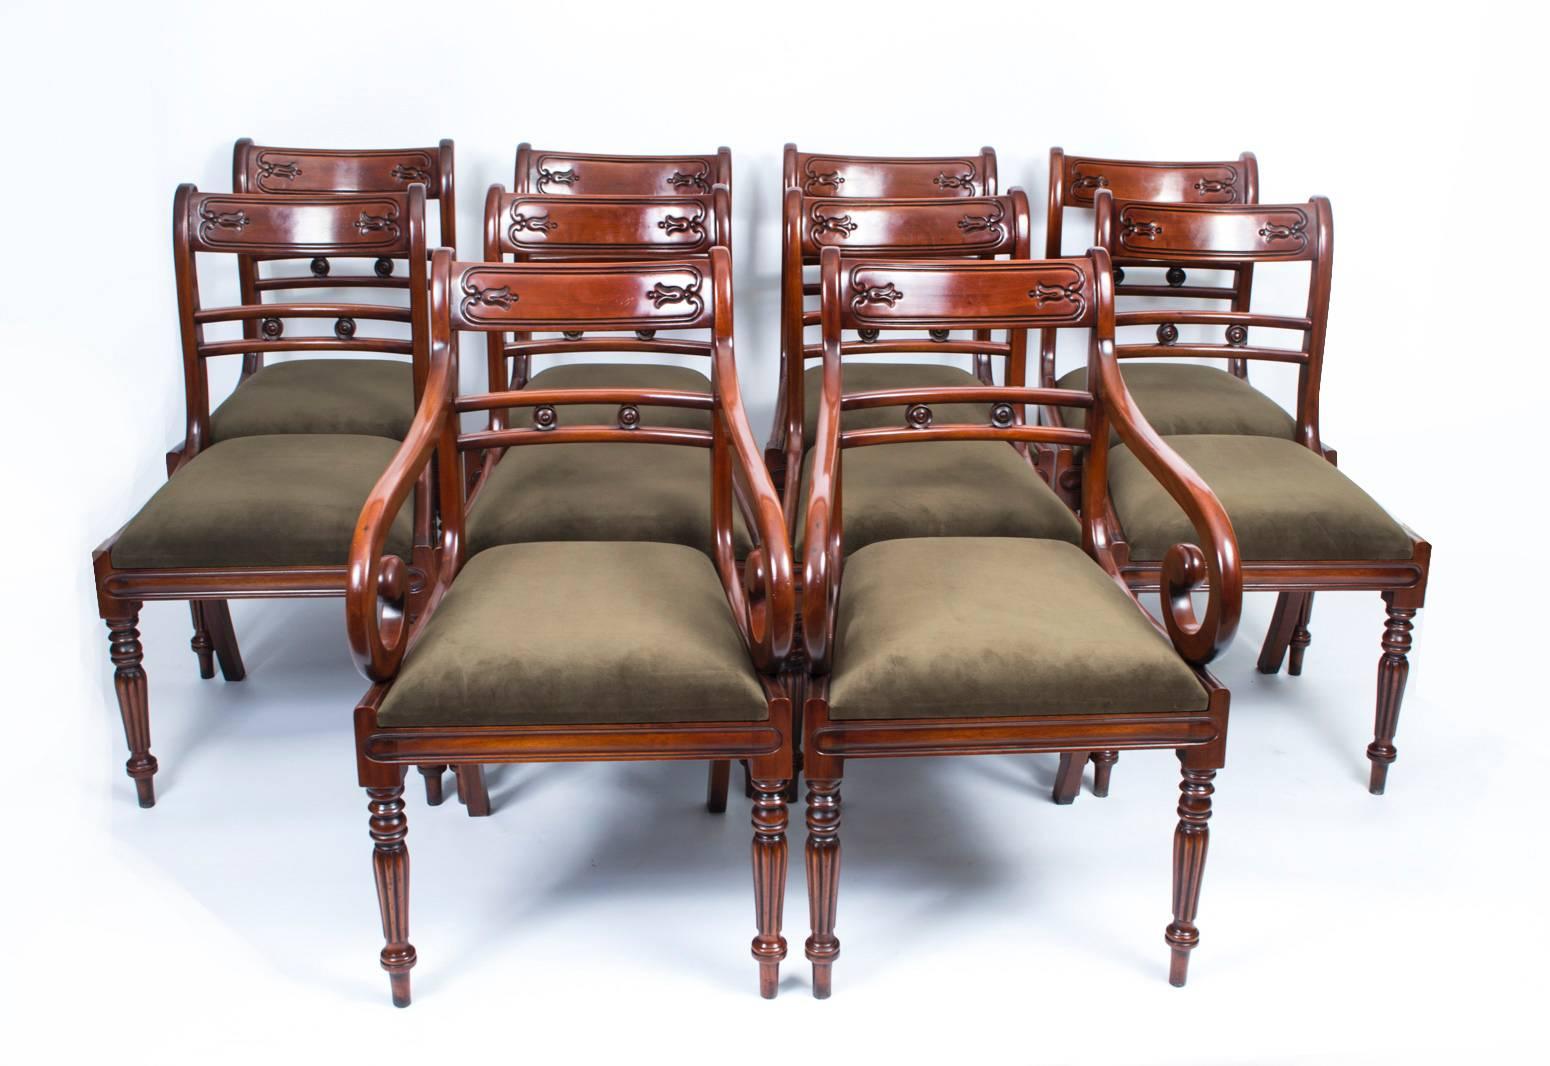 Grand Set of Ten Regency Style Tulip Back Dining Chairs 3